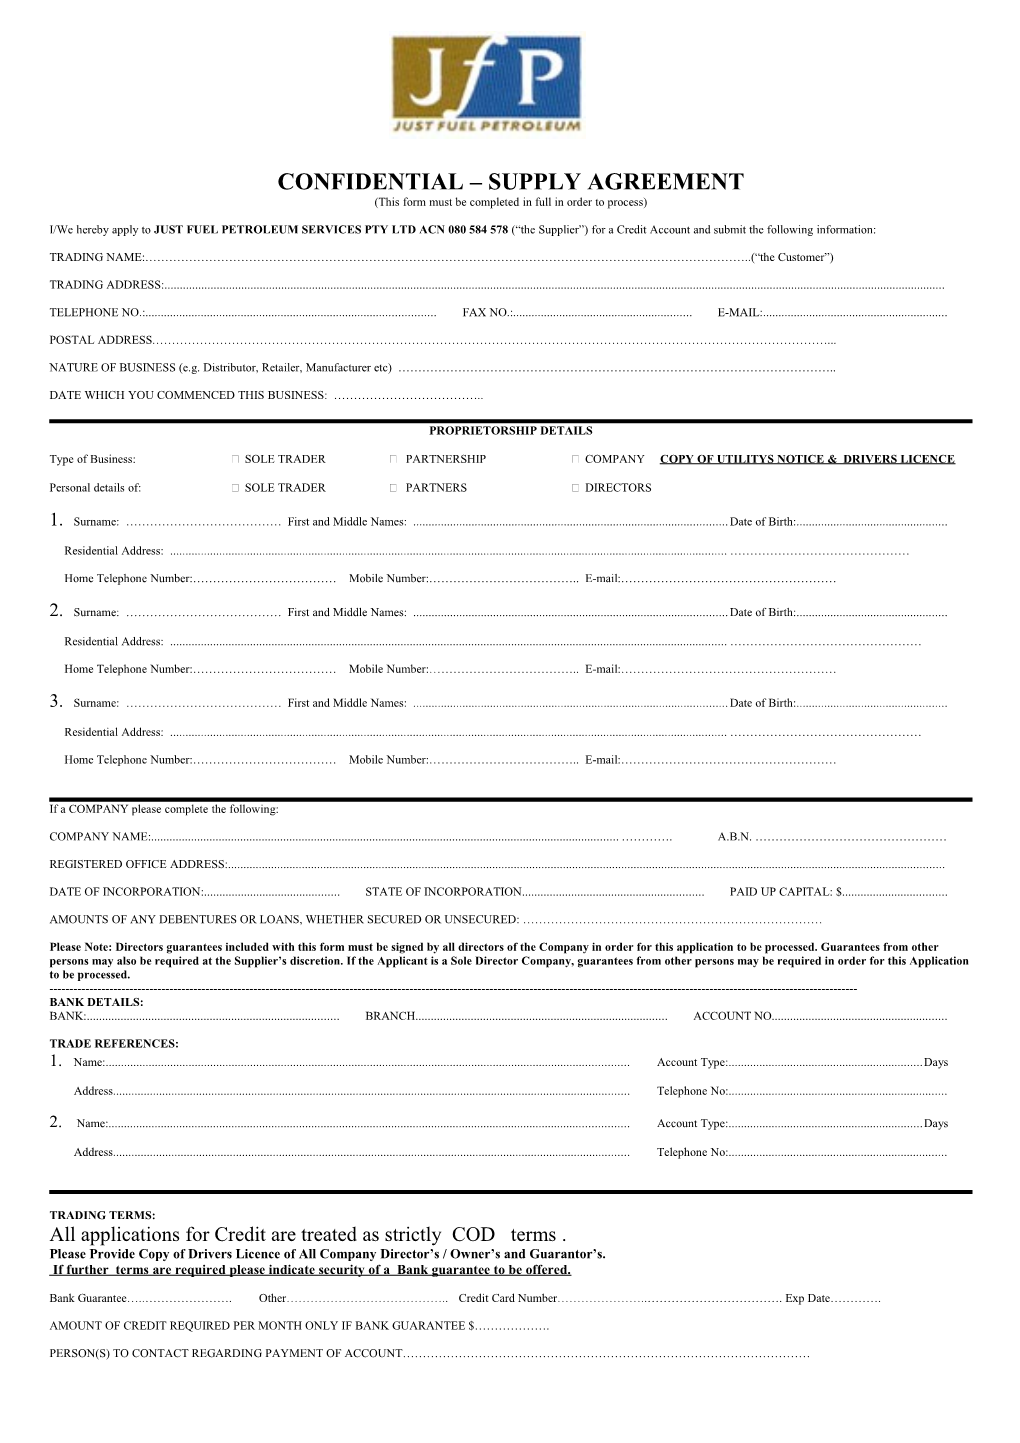 Confidential - Application for Credit